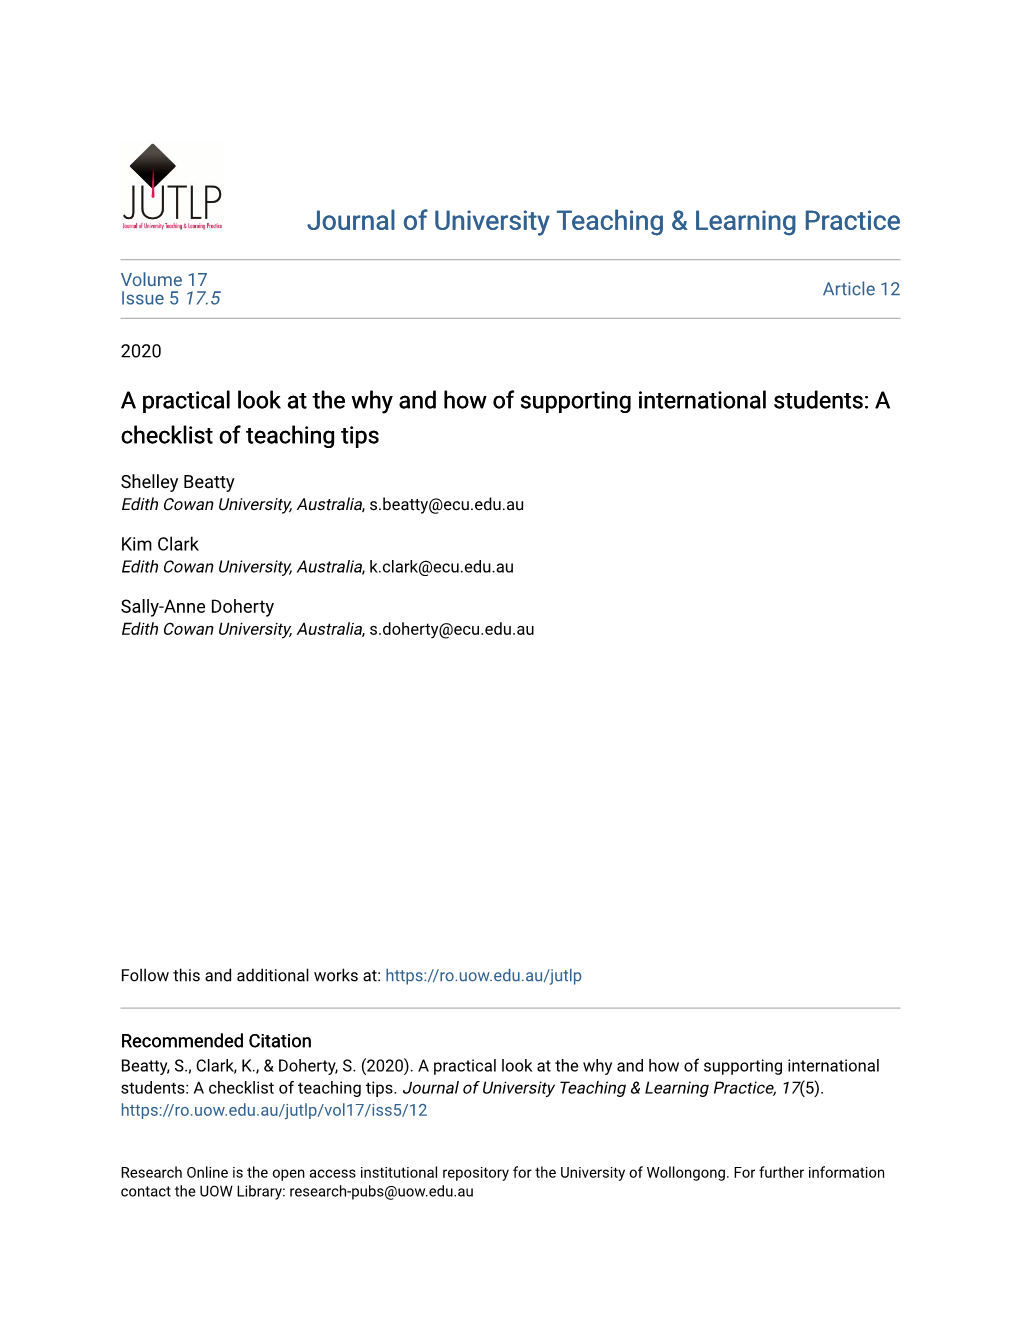 A Practical Look at the Why and How of Supporting International Students: a Checklist of Teaching Tips